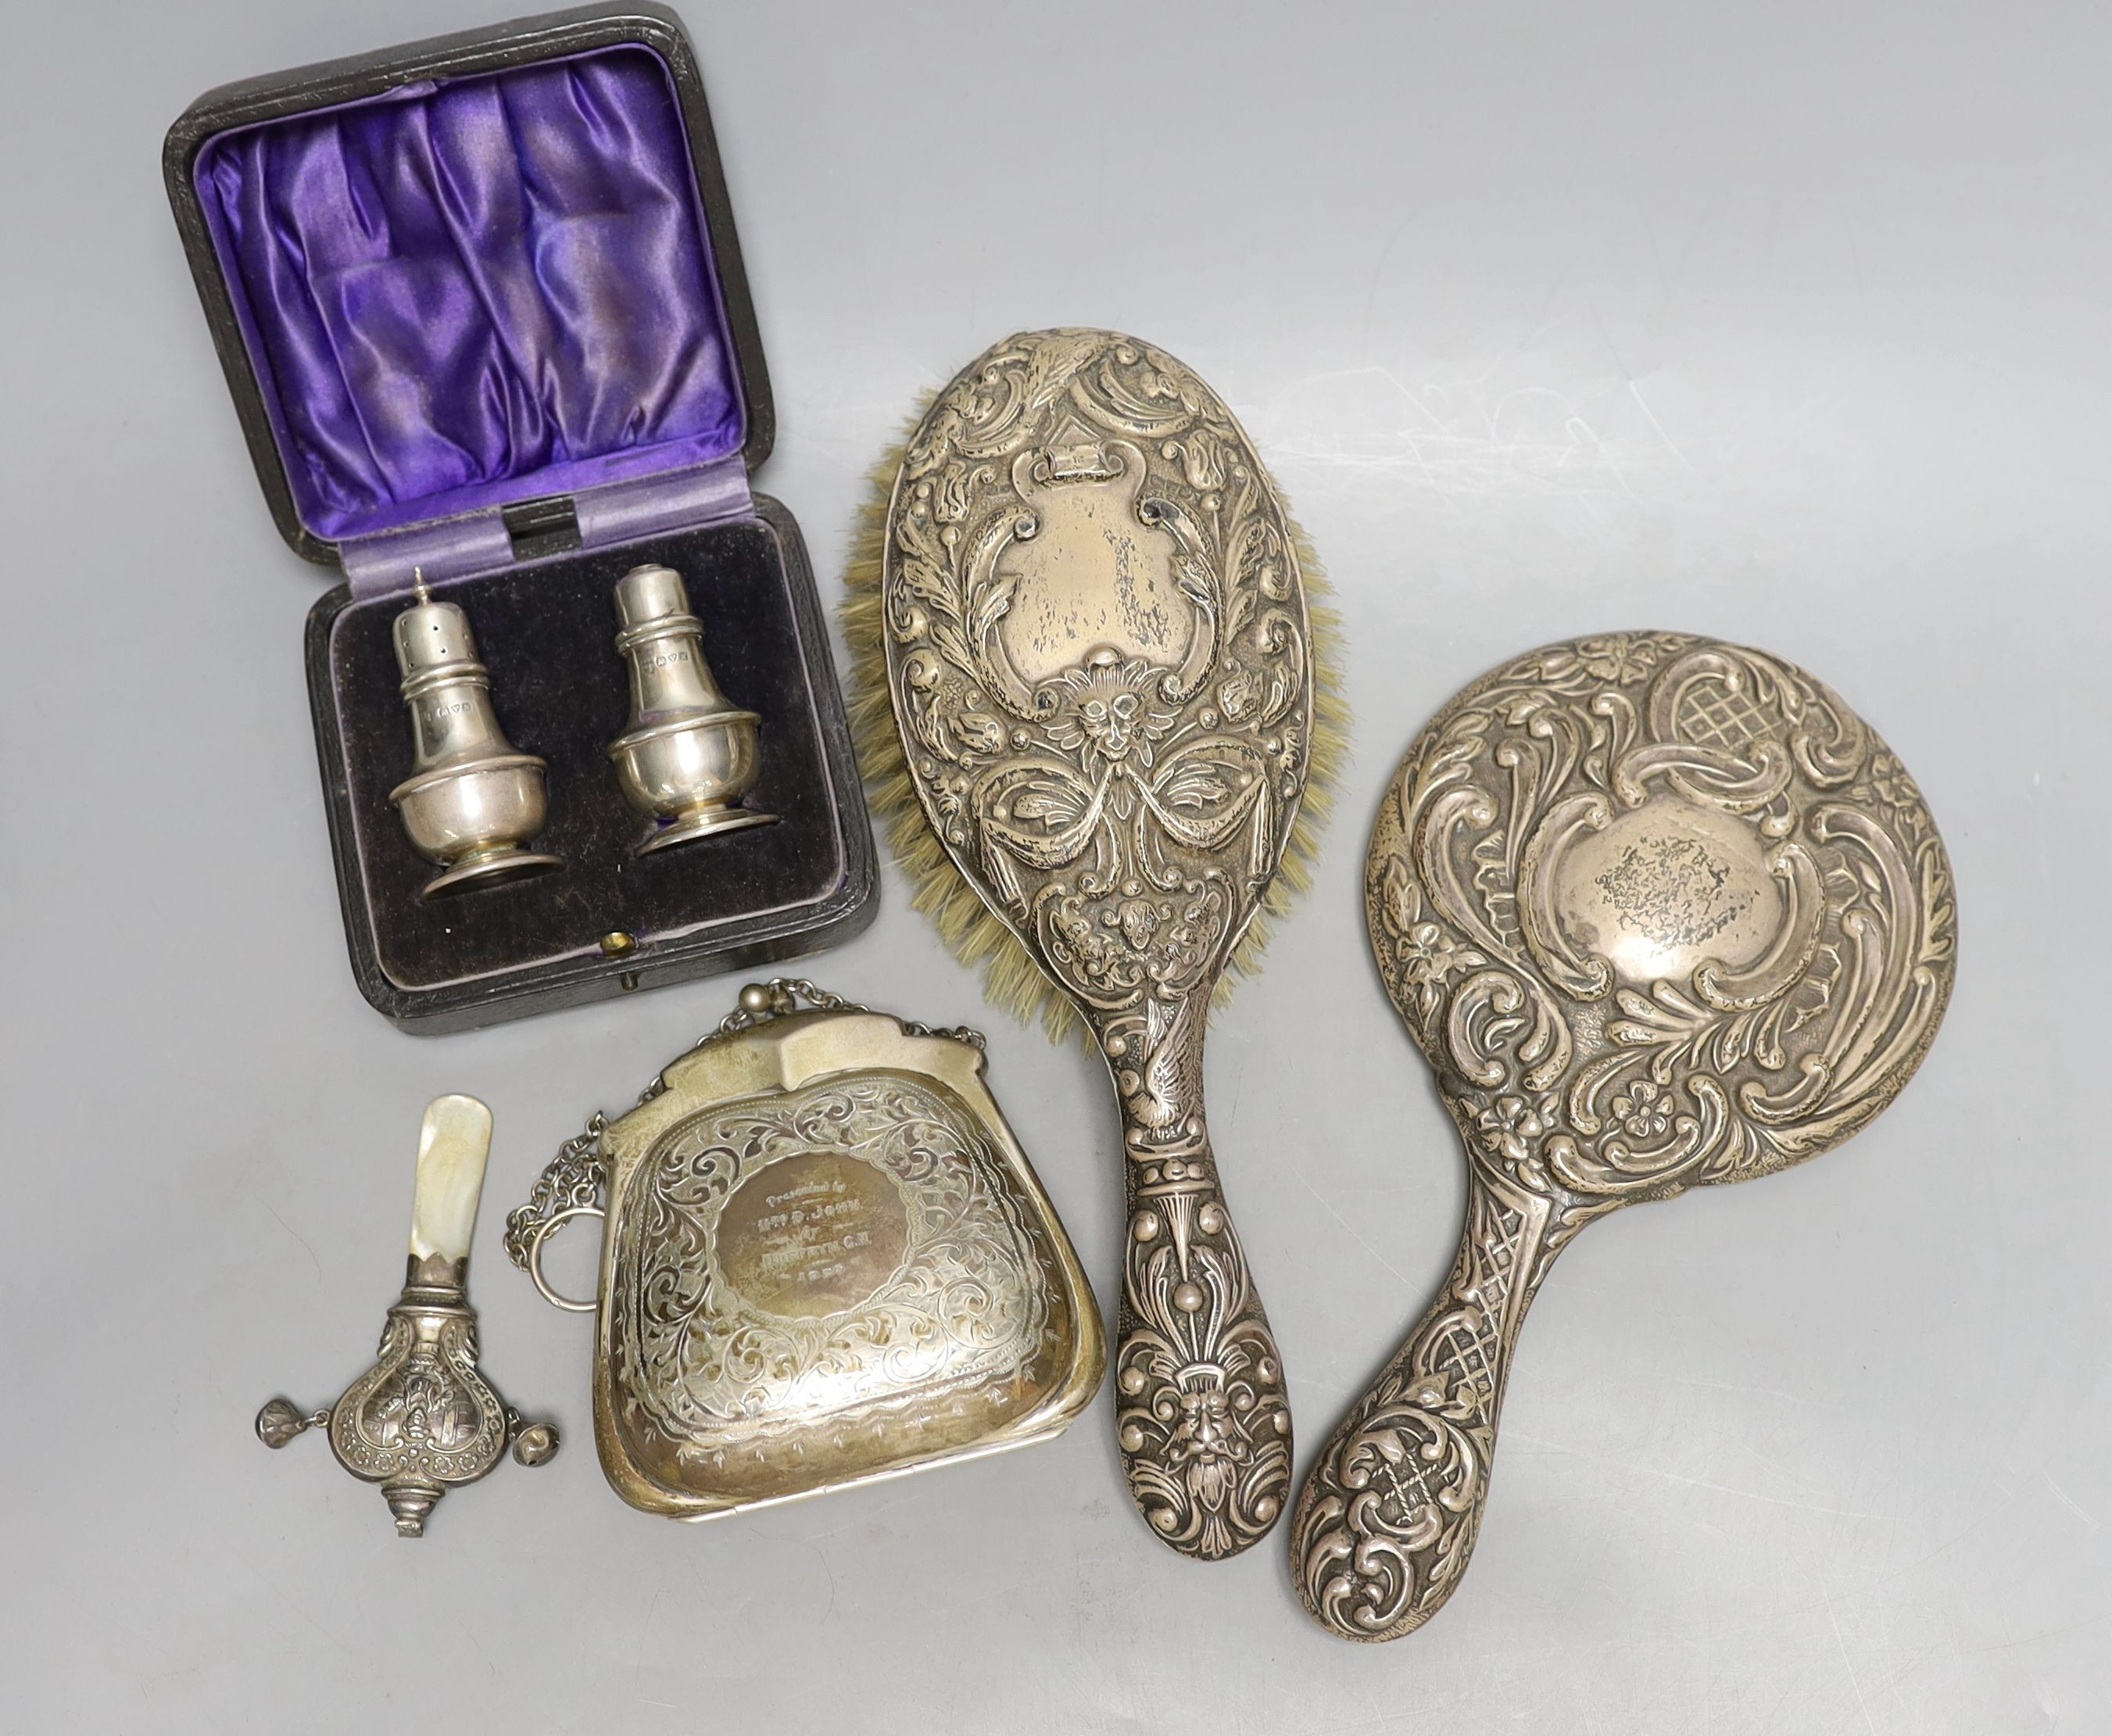 A cased pair of George V silver condiments, an engraved silver purse, silver mounted mirror and brush an a child's silver rattle.